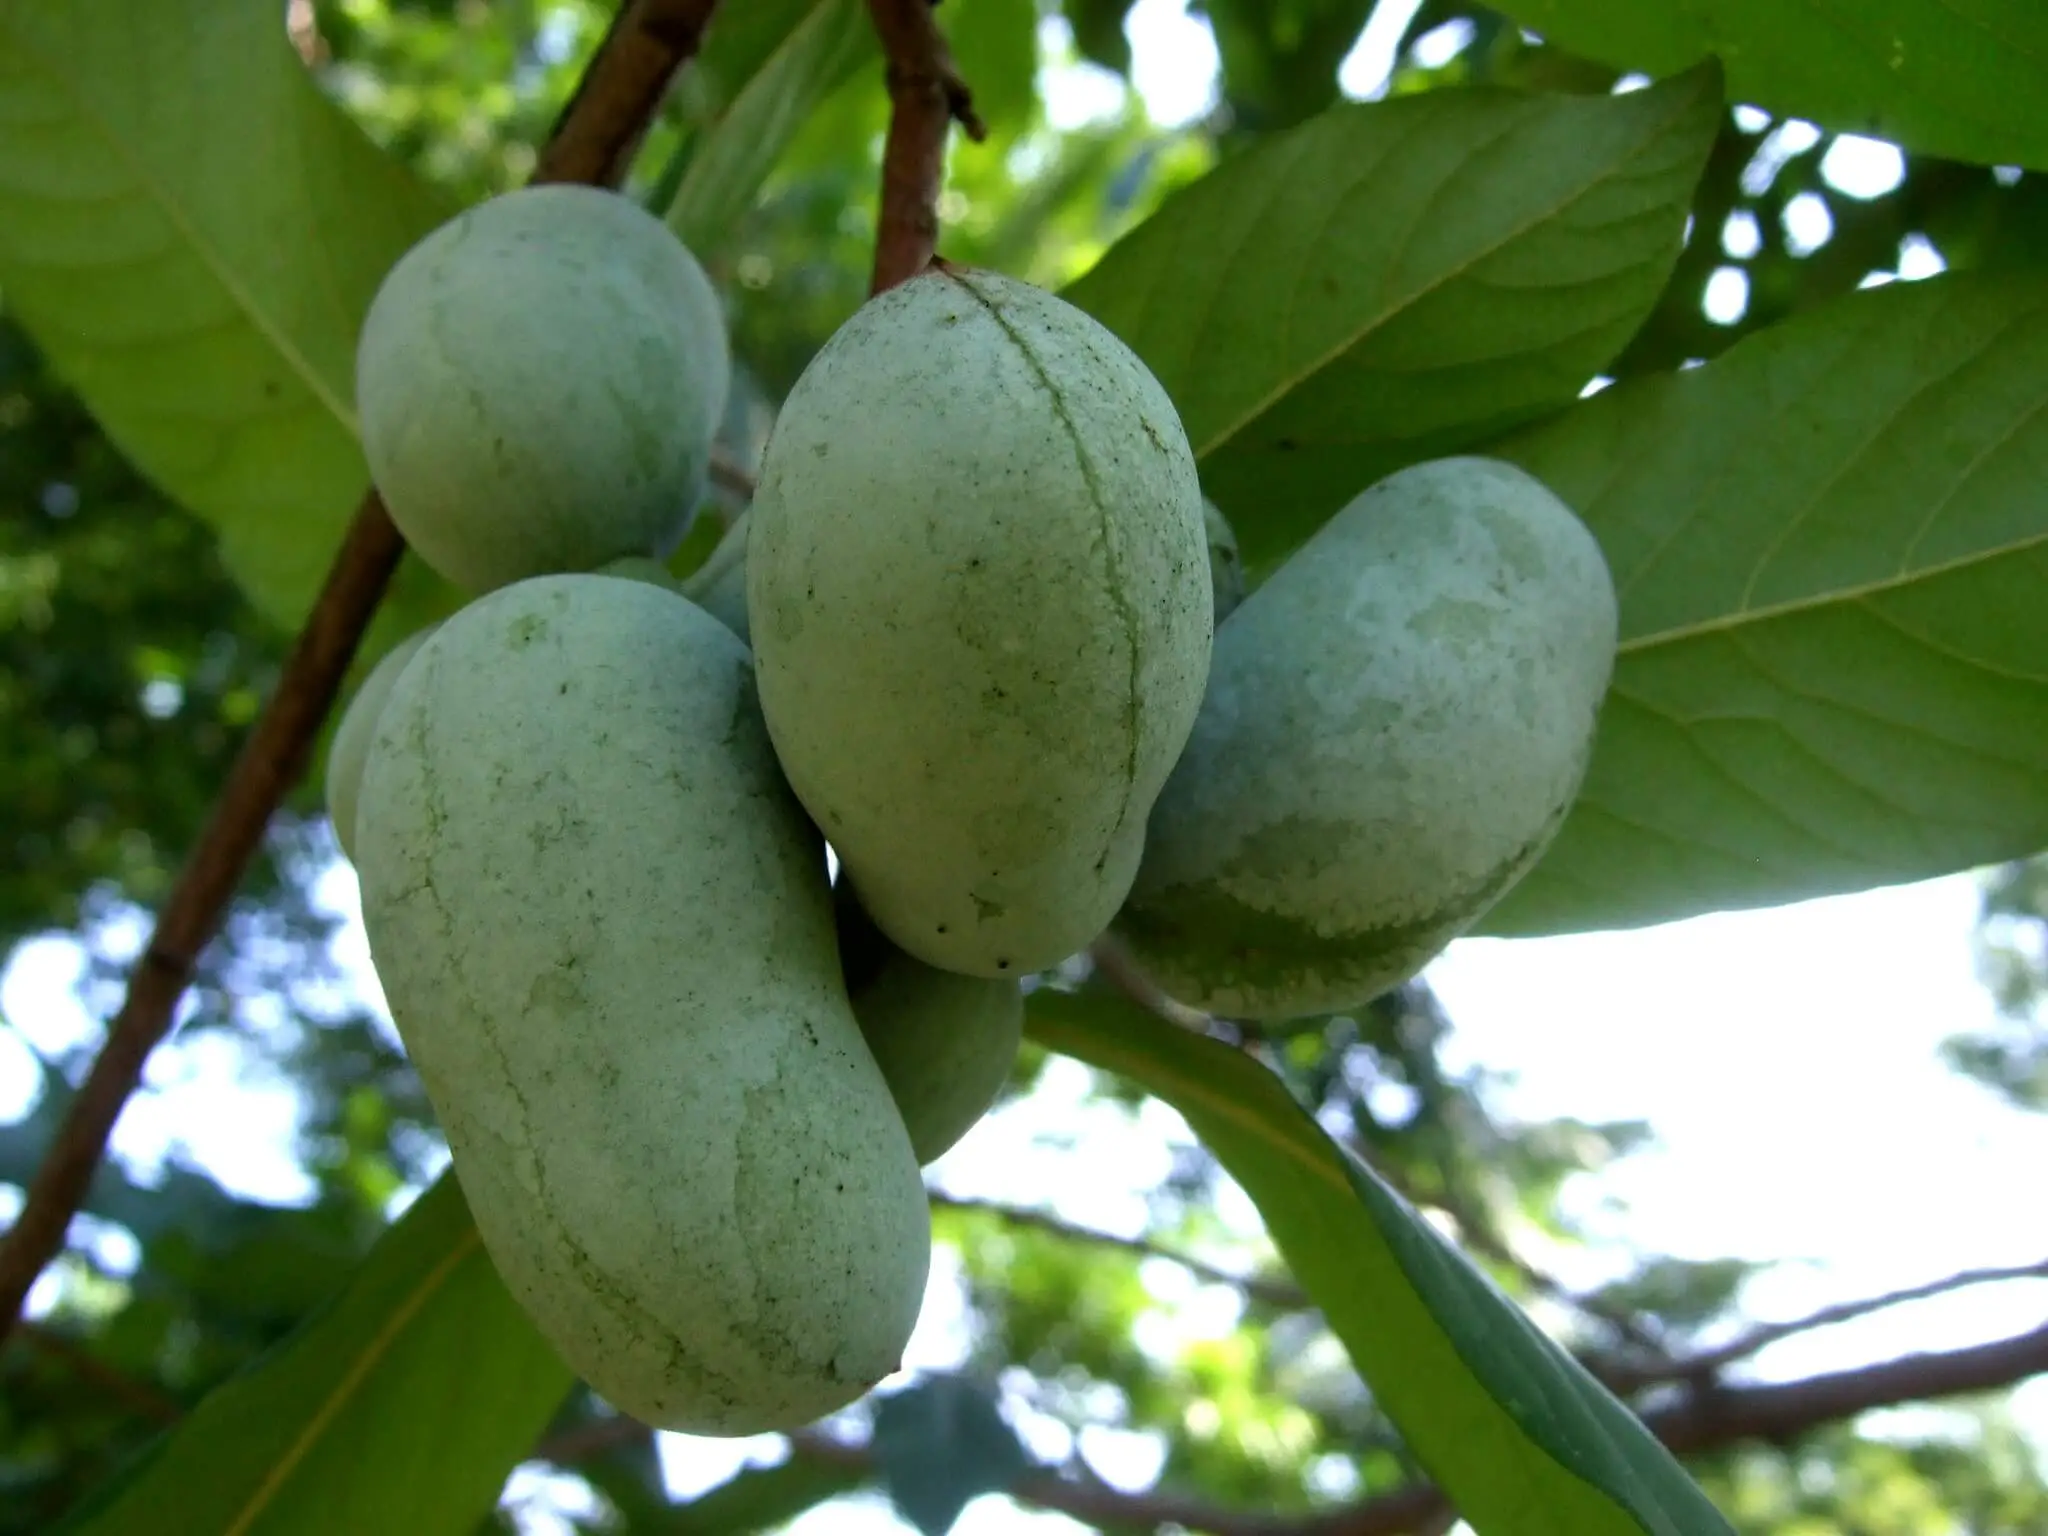 A cluster of 4 pawpaw fruits.